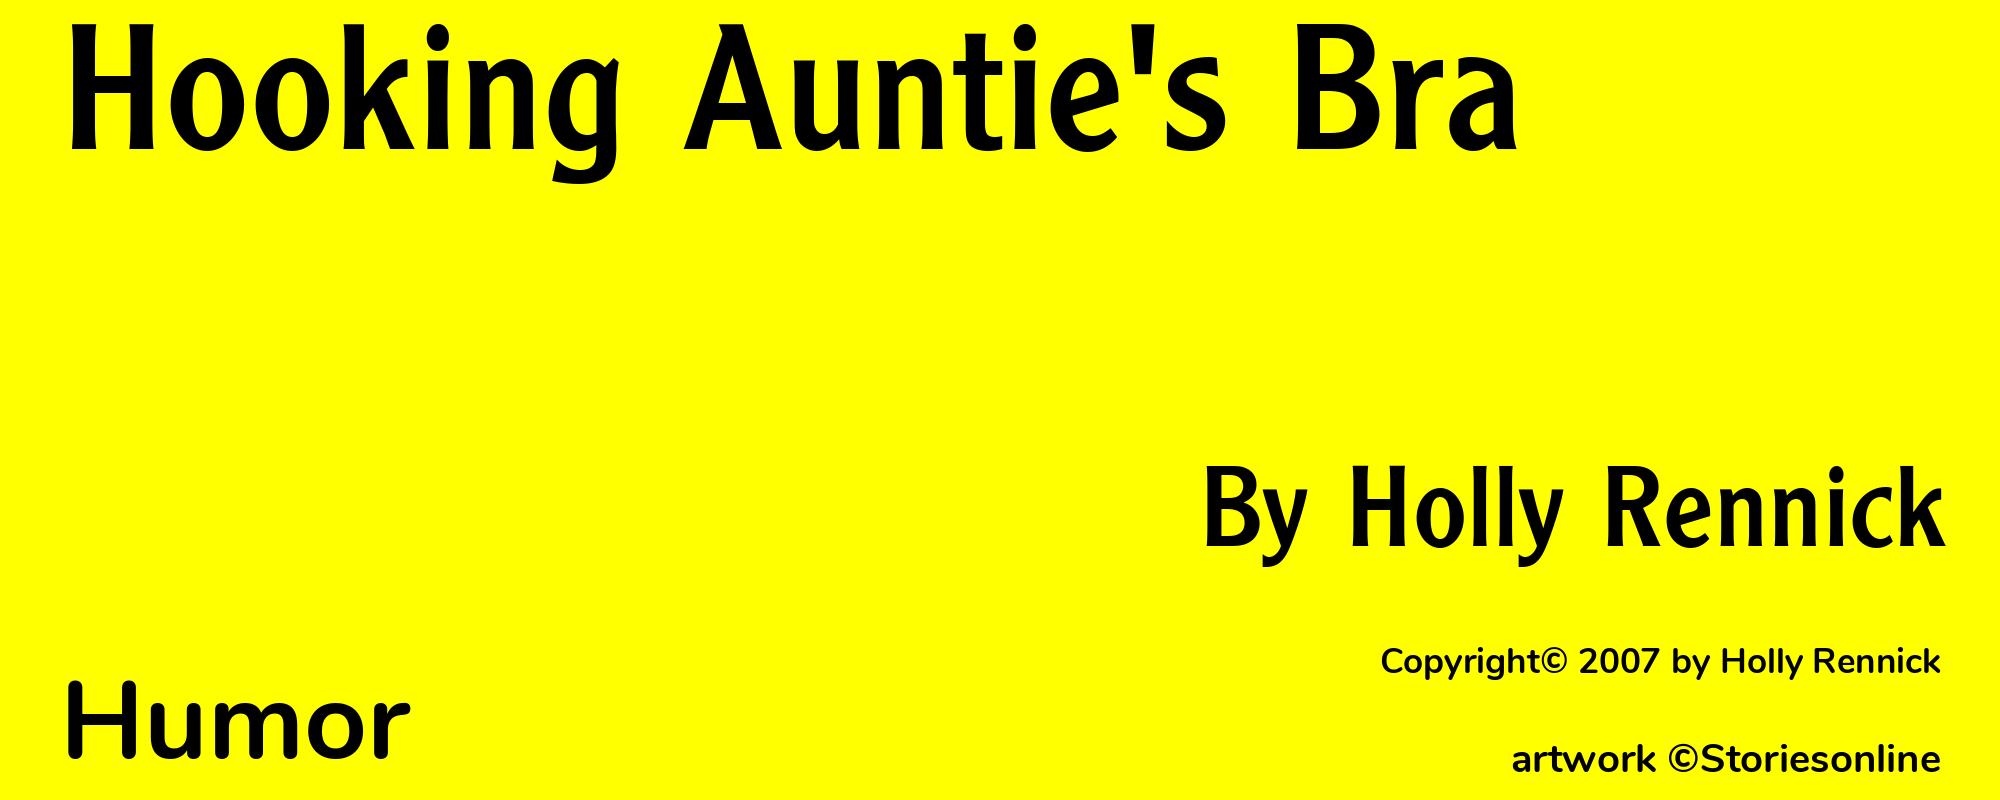 Hooking Auntie's Bra - Cover